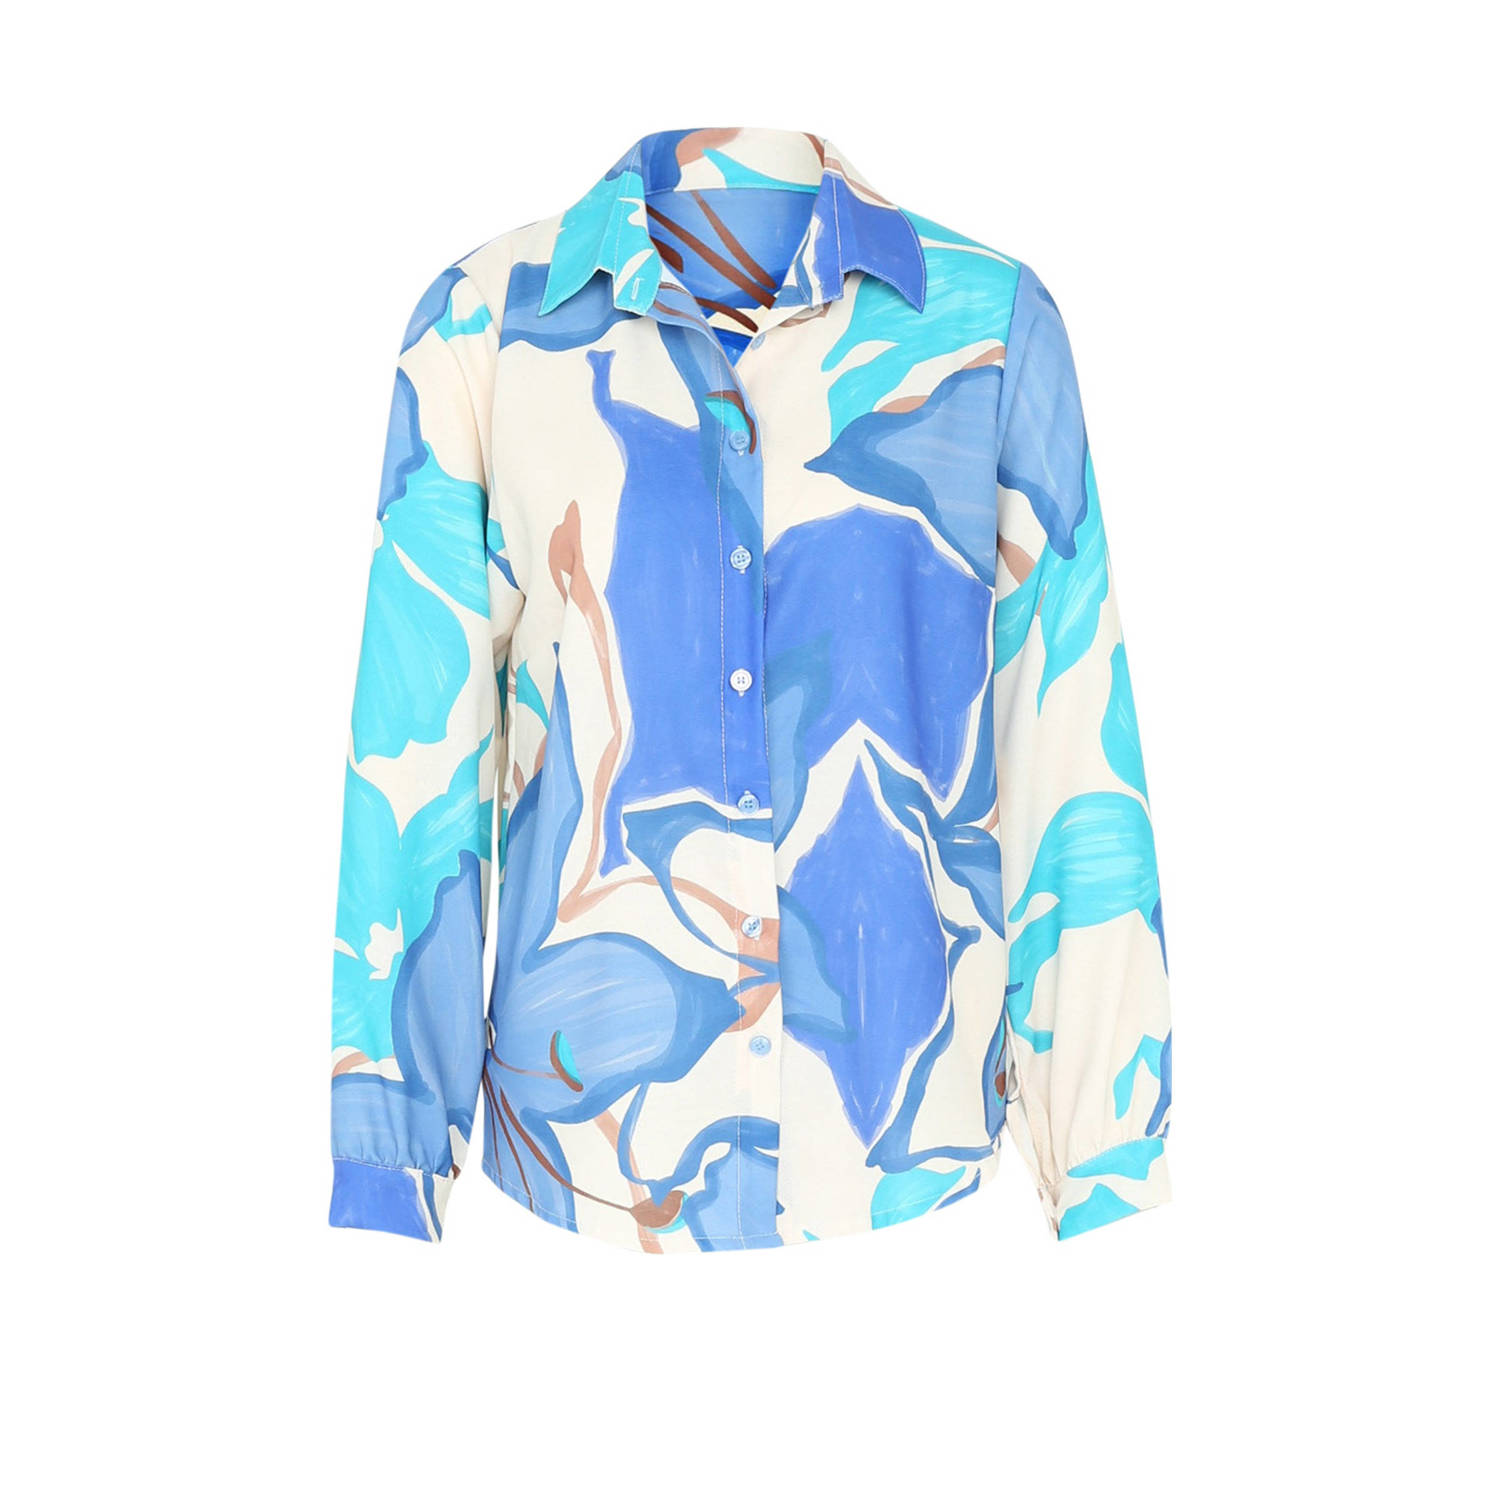 Cassis blouse met all over print blauw ecru turqouise